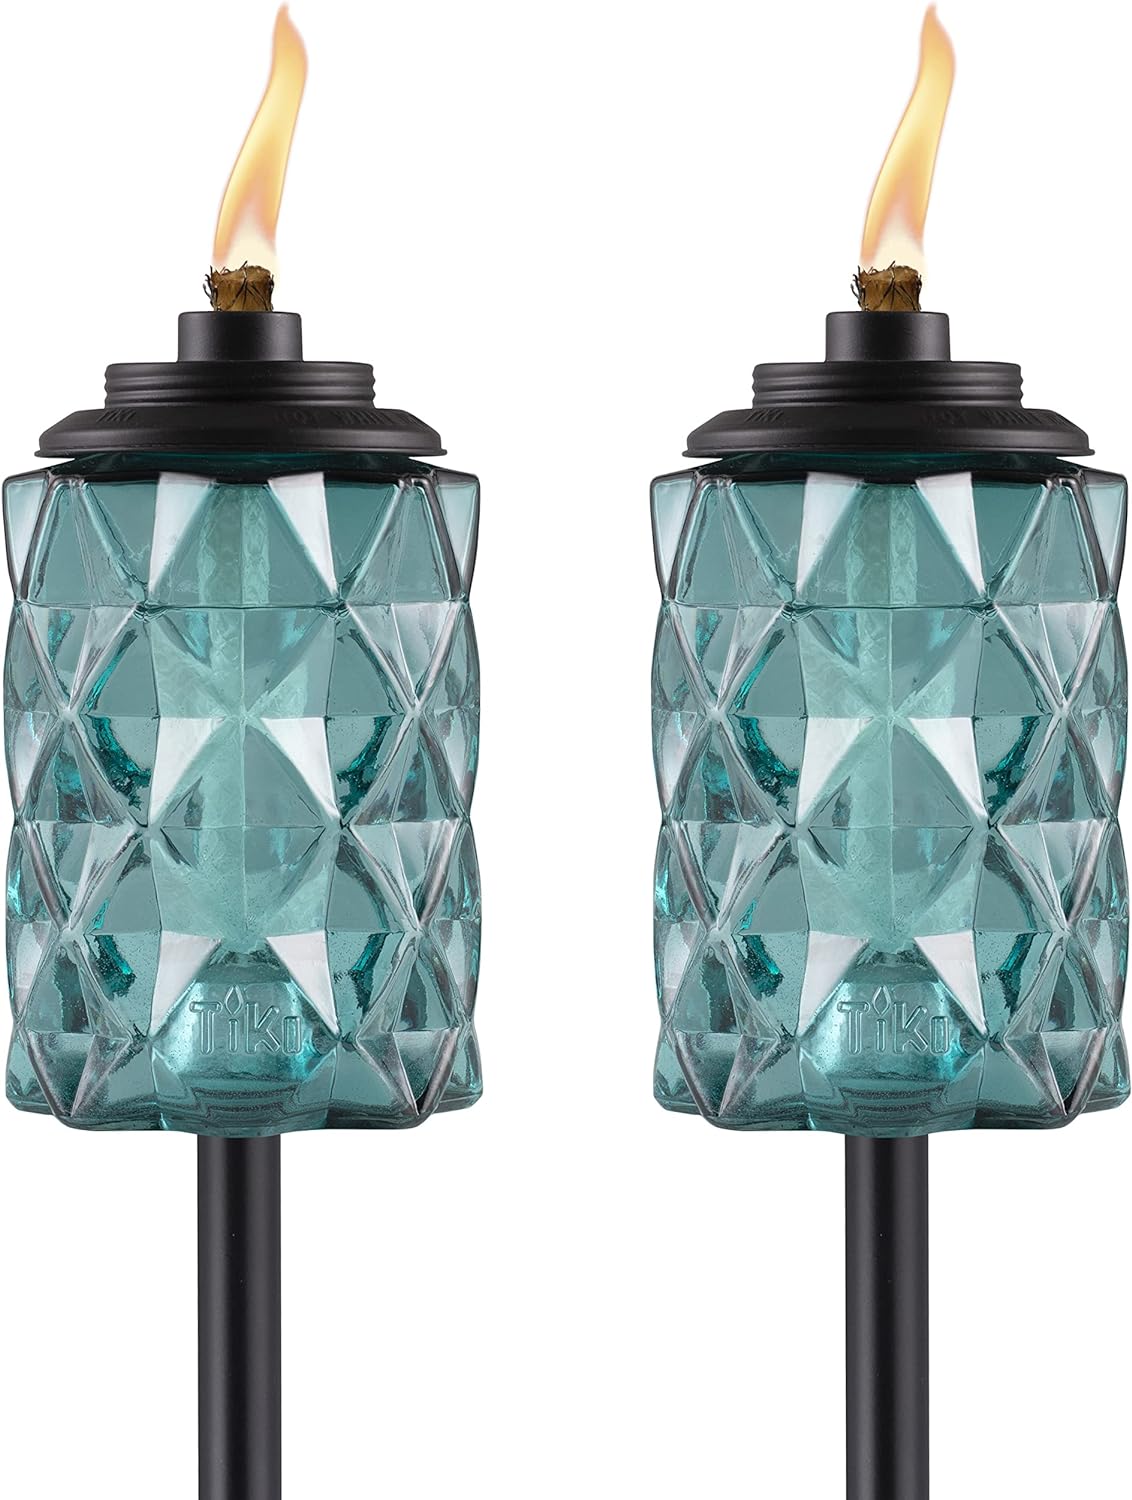 TIKI Brand 2-Pack Topaz Blue Glass Easy Install Tiki Torch, Outdoor Decorative Lighting for Lawn Patio Backyard, 65 Inch, Blue, 1122125